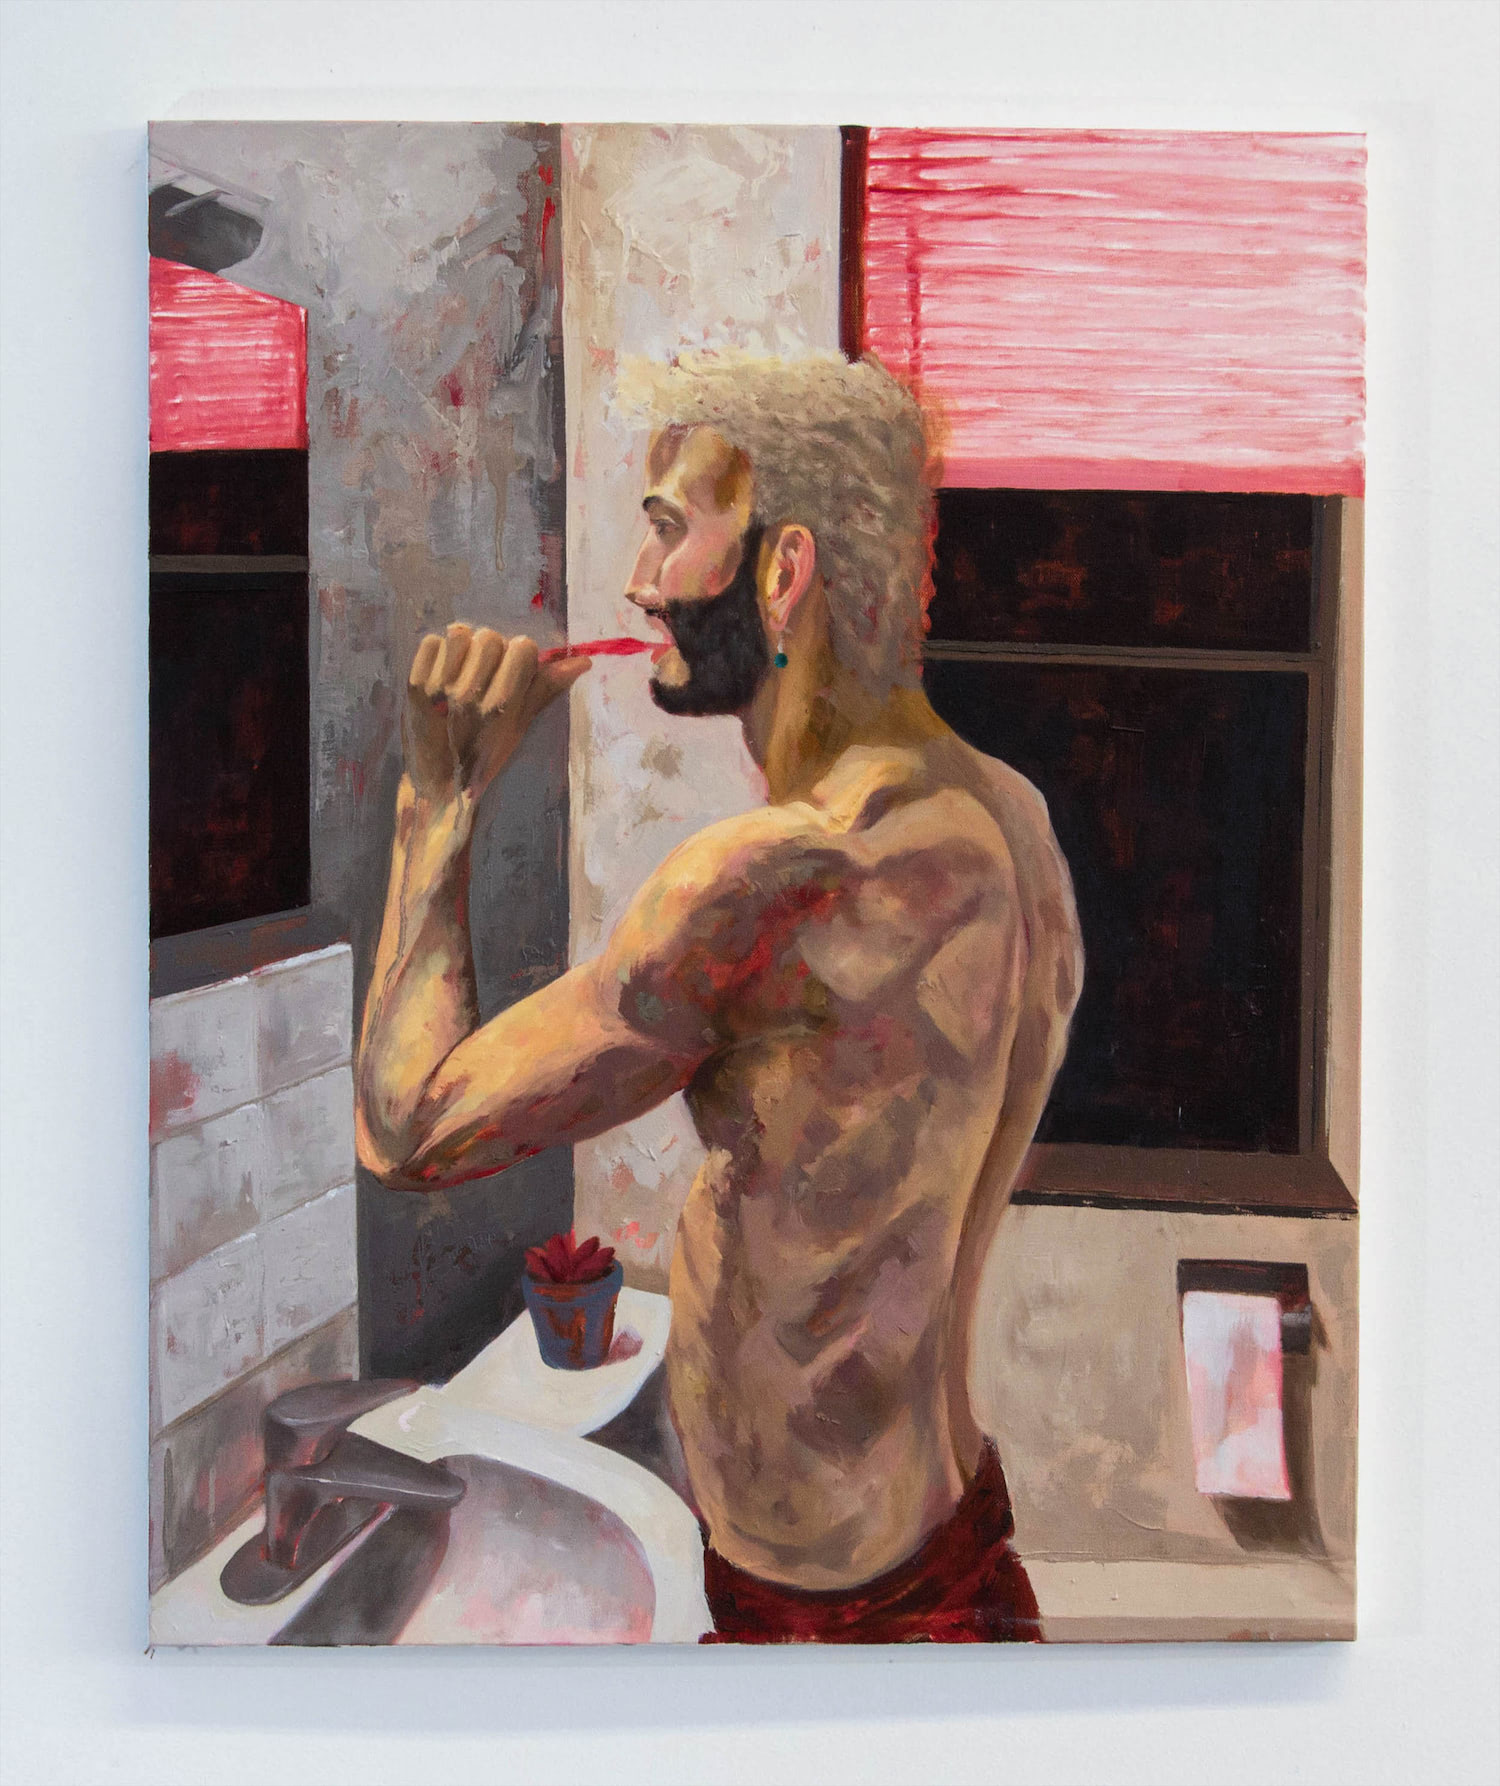 This image depicts a vertical figurative oil painting of the artist himself. He stands in front of a mirror, brushing his teeth. The man's body fills a large portion of the image. It is painted with rich textures as deep reds from the underpainting shine through.